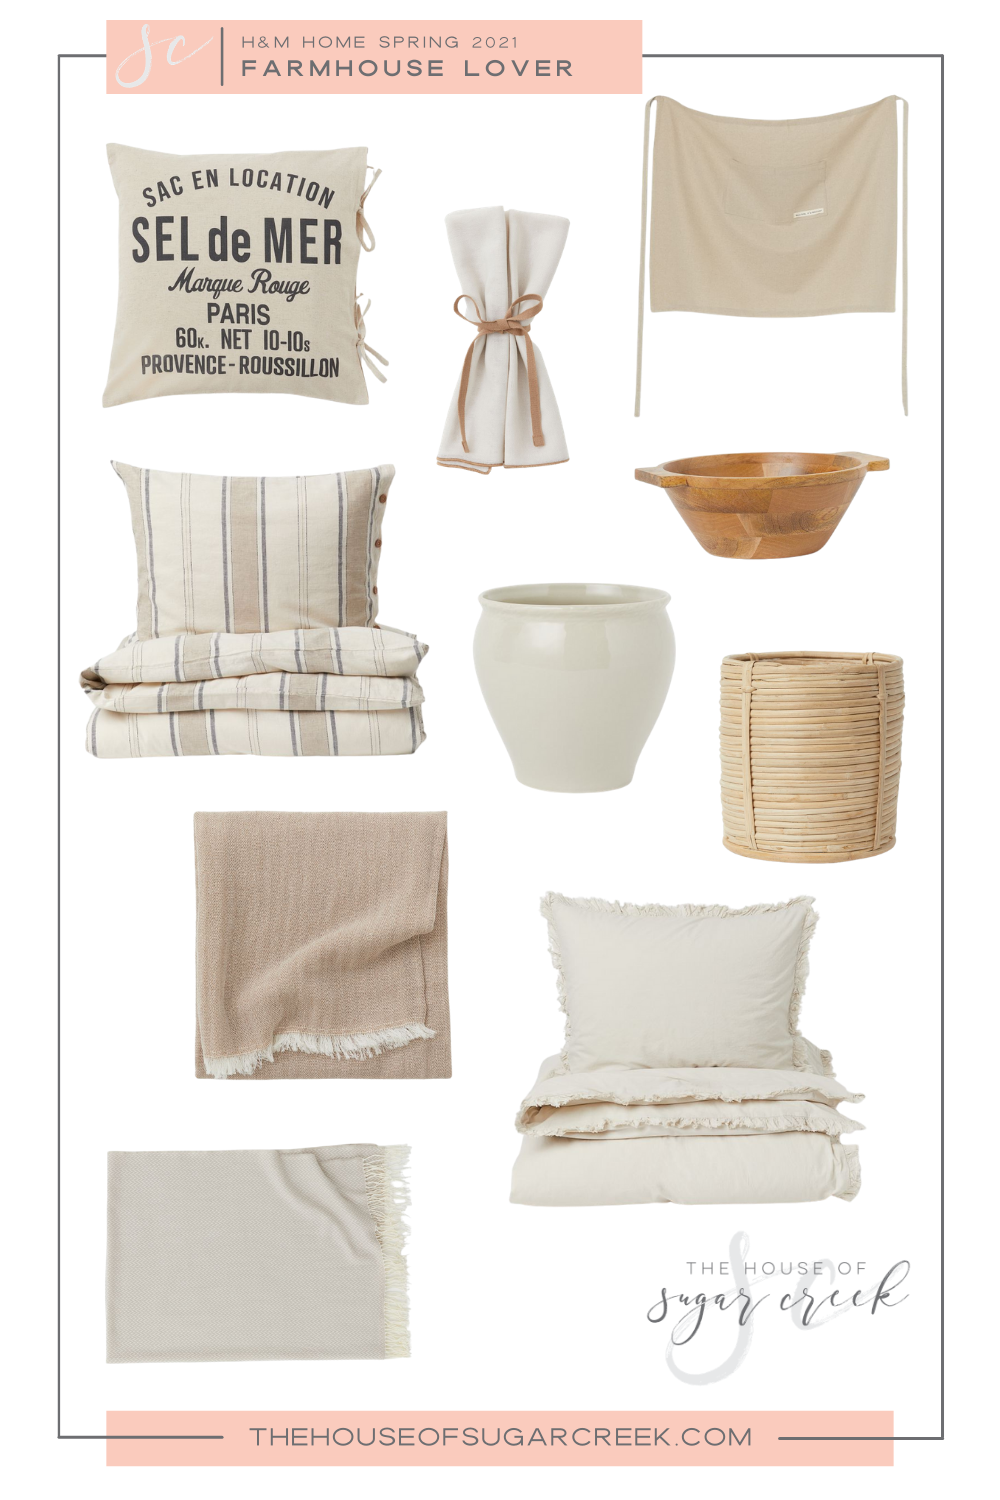 Fresh Farmhouse Finds from H&M Home Spring 2021